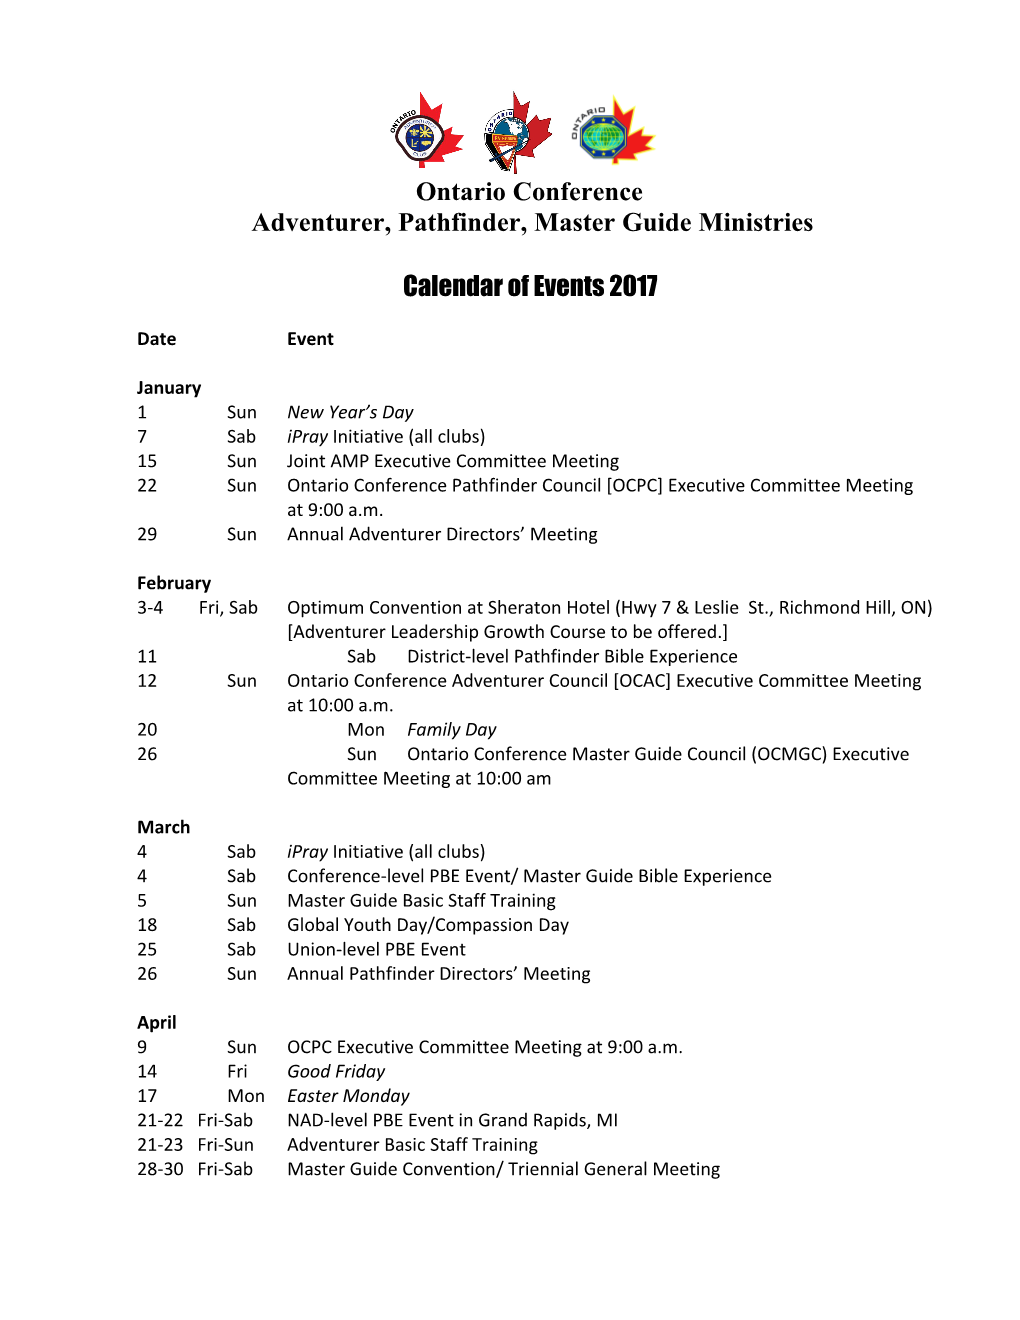 Ontario Conference Calendar of Events 2011(Draft)